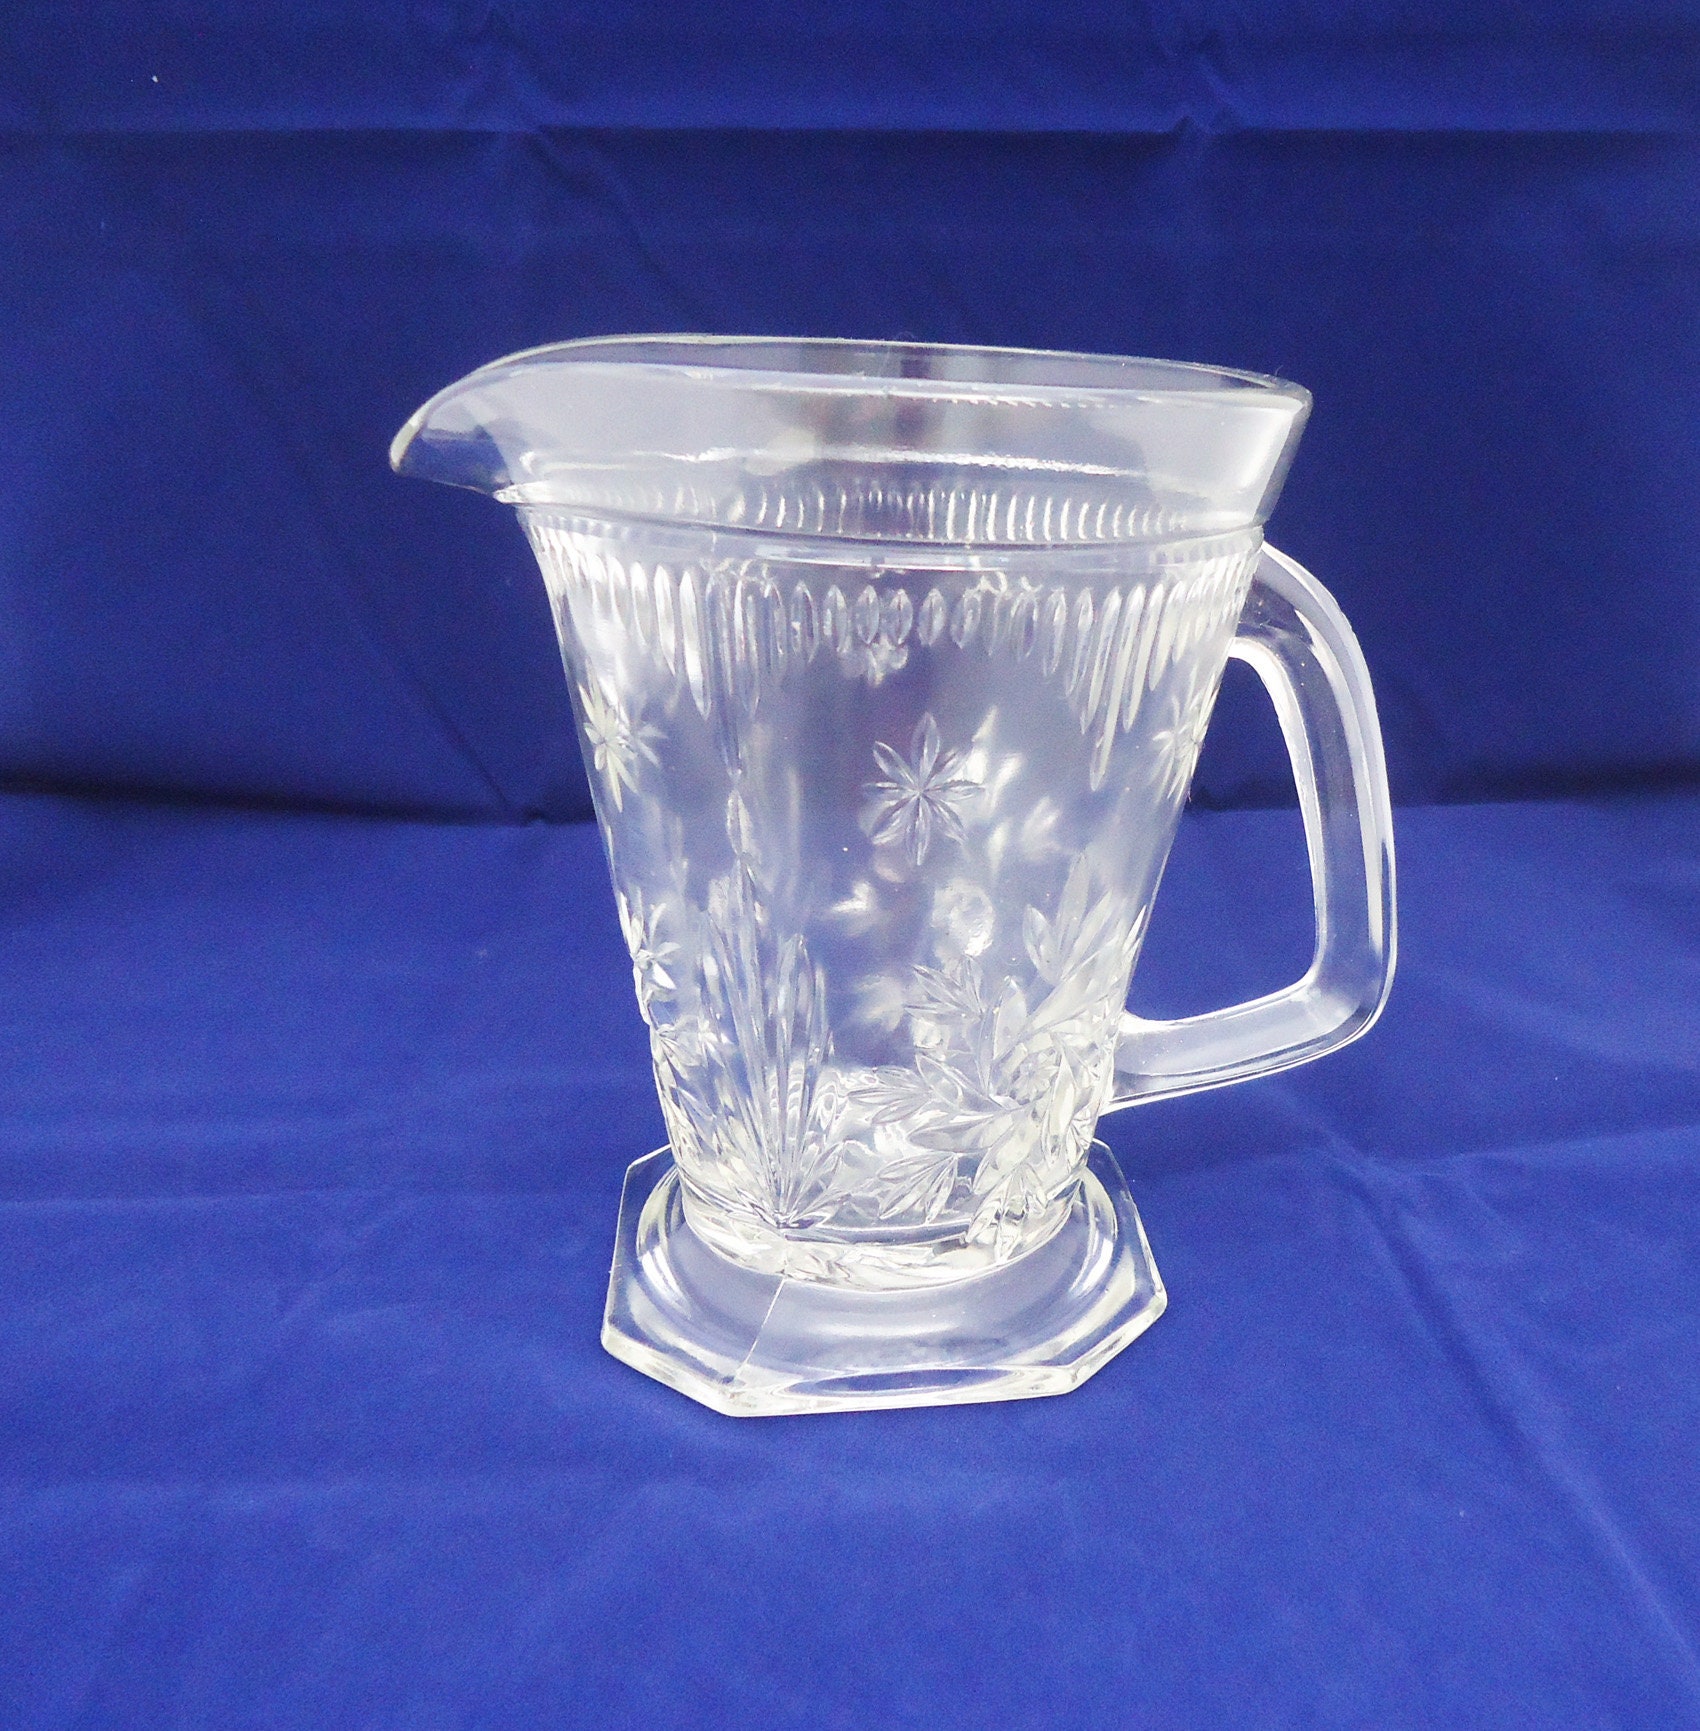 Sold at Auction: Vintage Clear Small Glass Pitcher